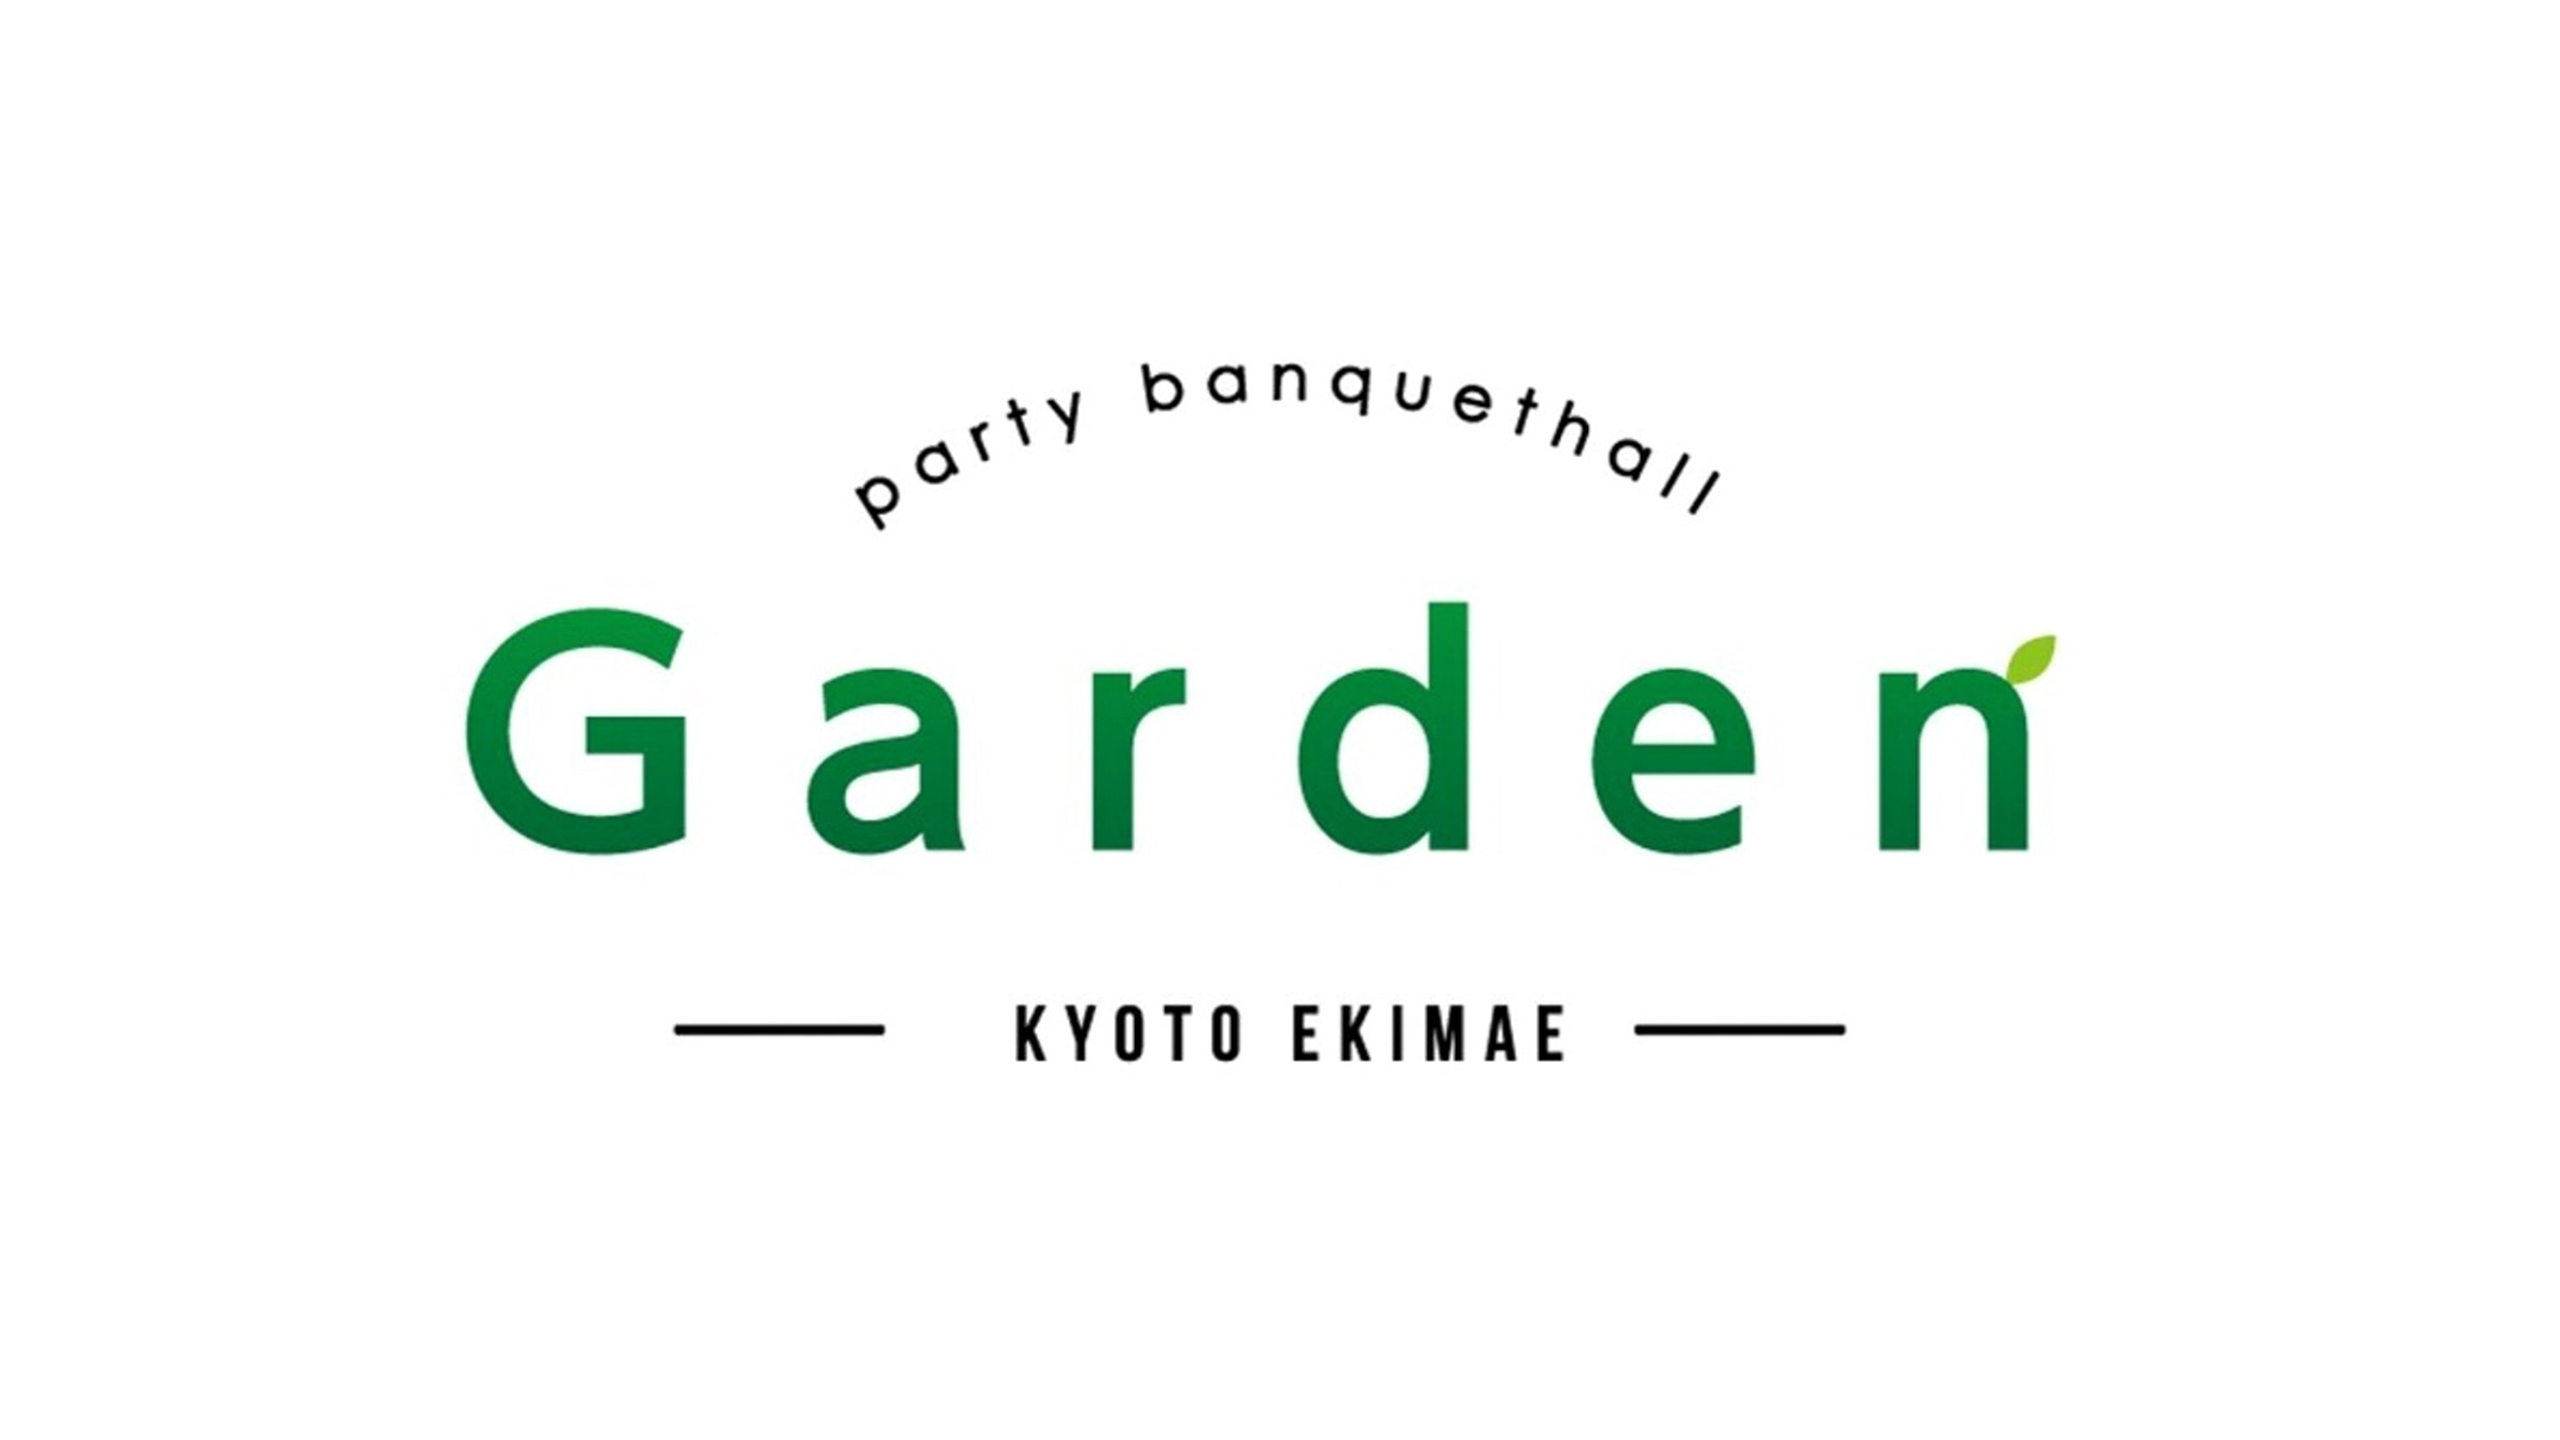 [party banquethall Garden -ガーデン-]